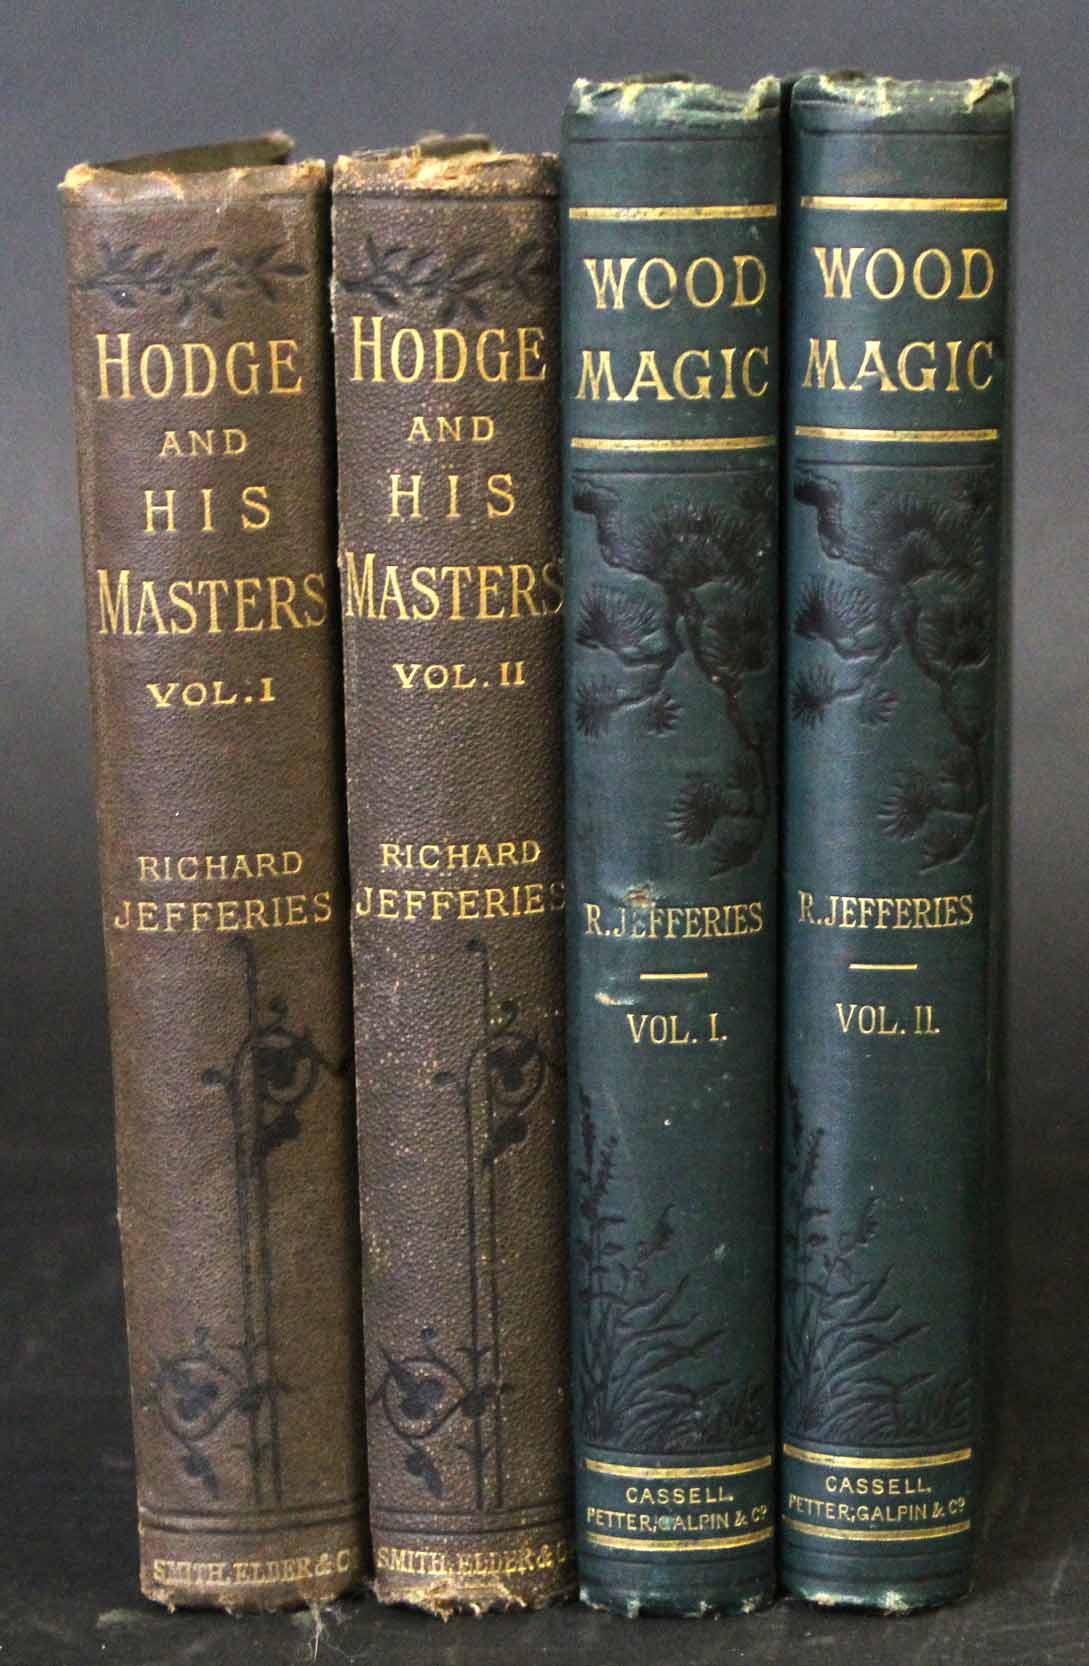 RICHARD JEFFERIES: 2 titles: HODGE AND HIS MASTERS, London, Smith Elder & Co, 1880, 1st edition, 2